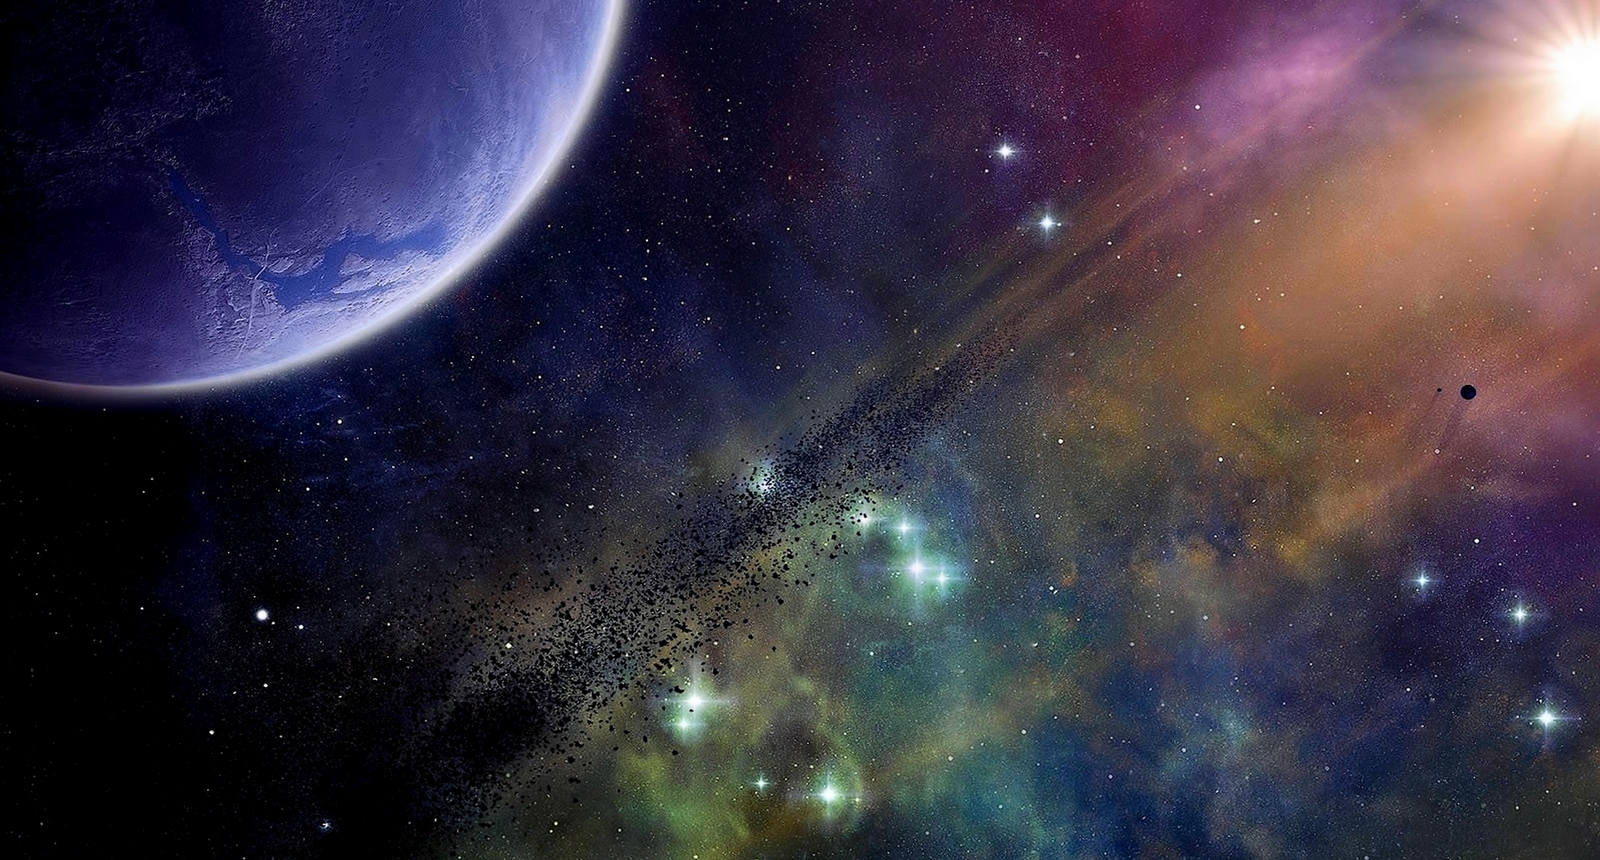 Epic Space Wallpaper